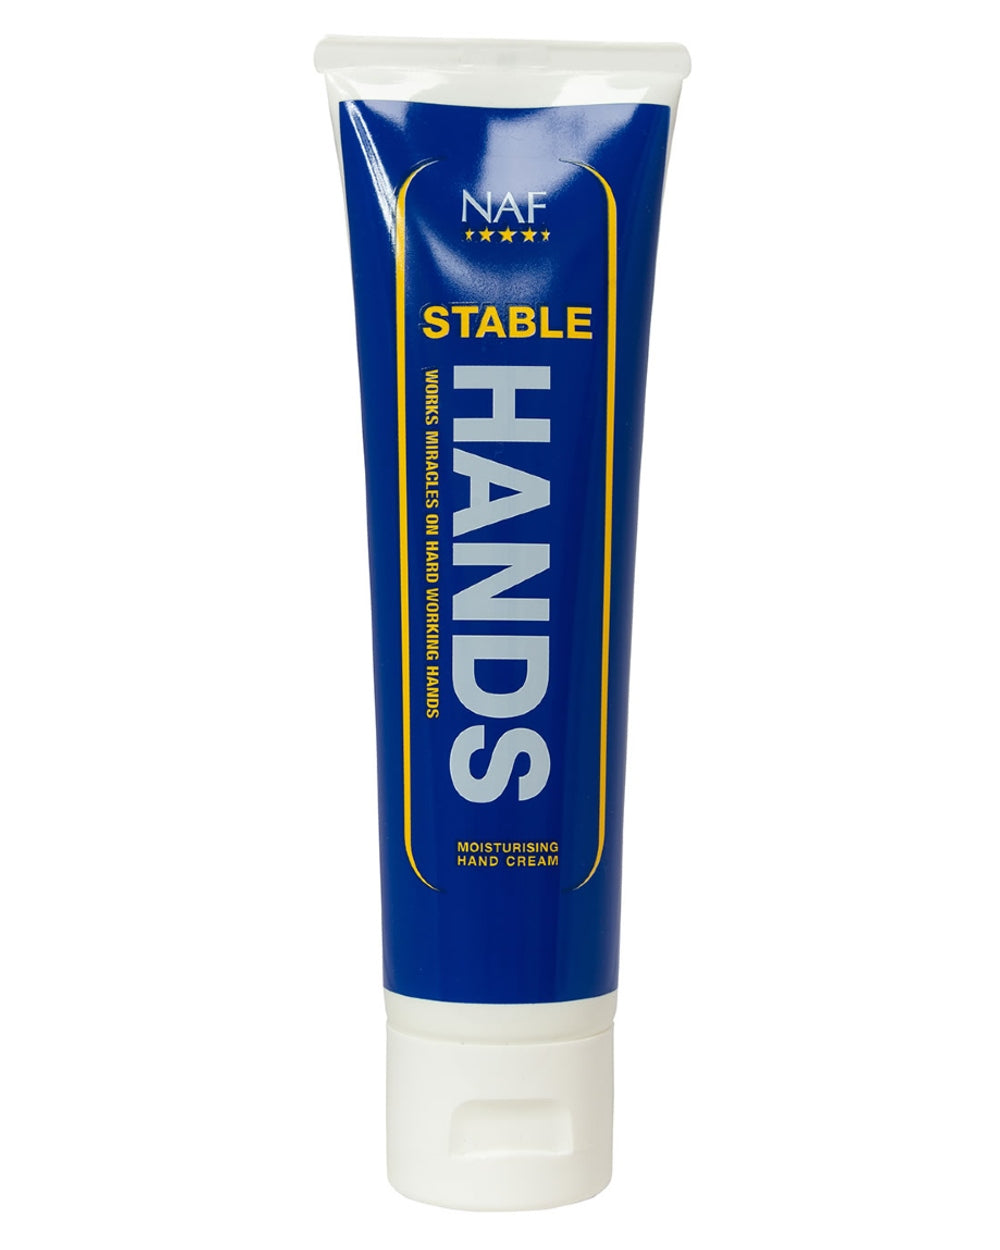 NAF Stablehands 100ml on white background